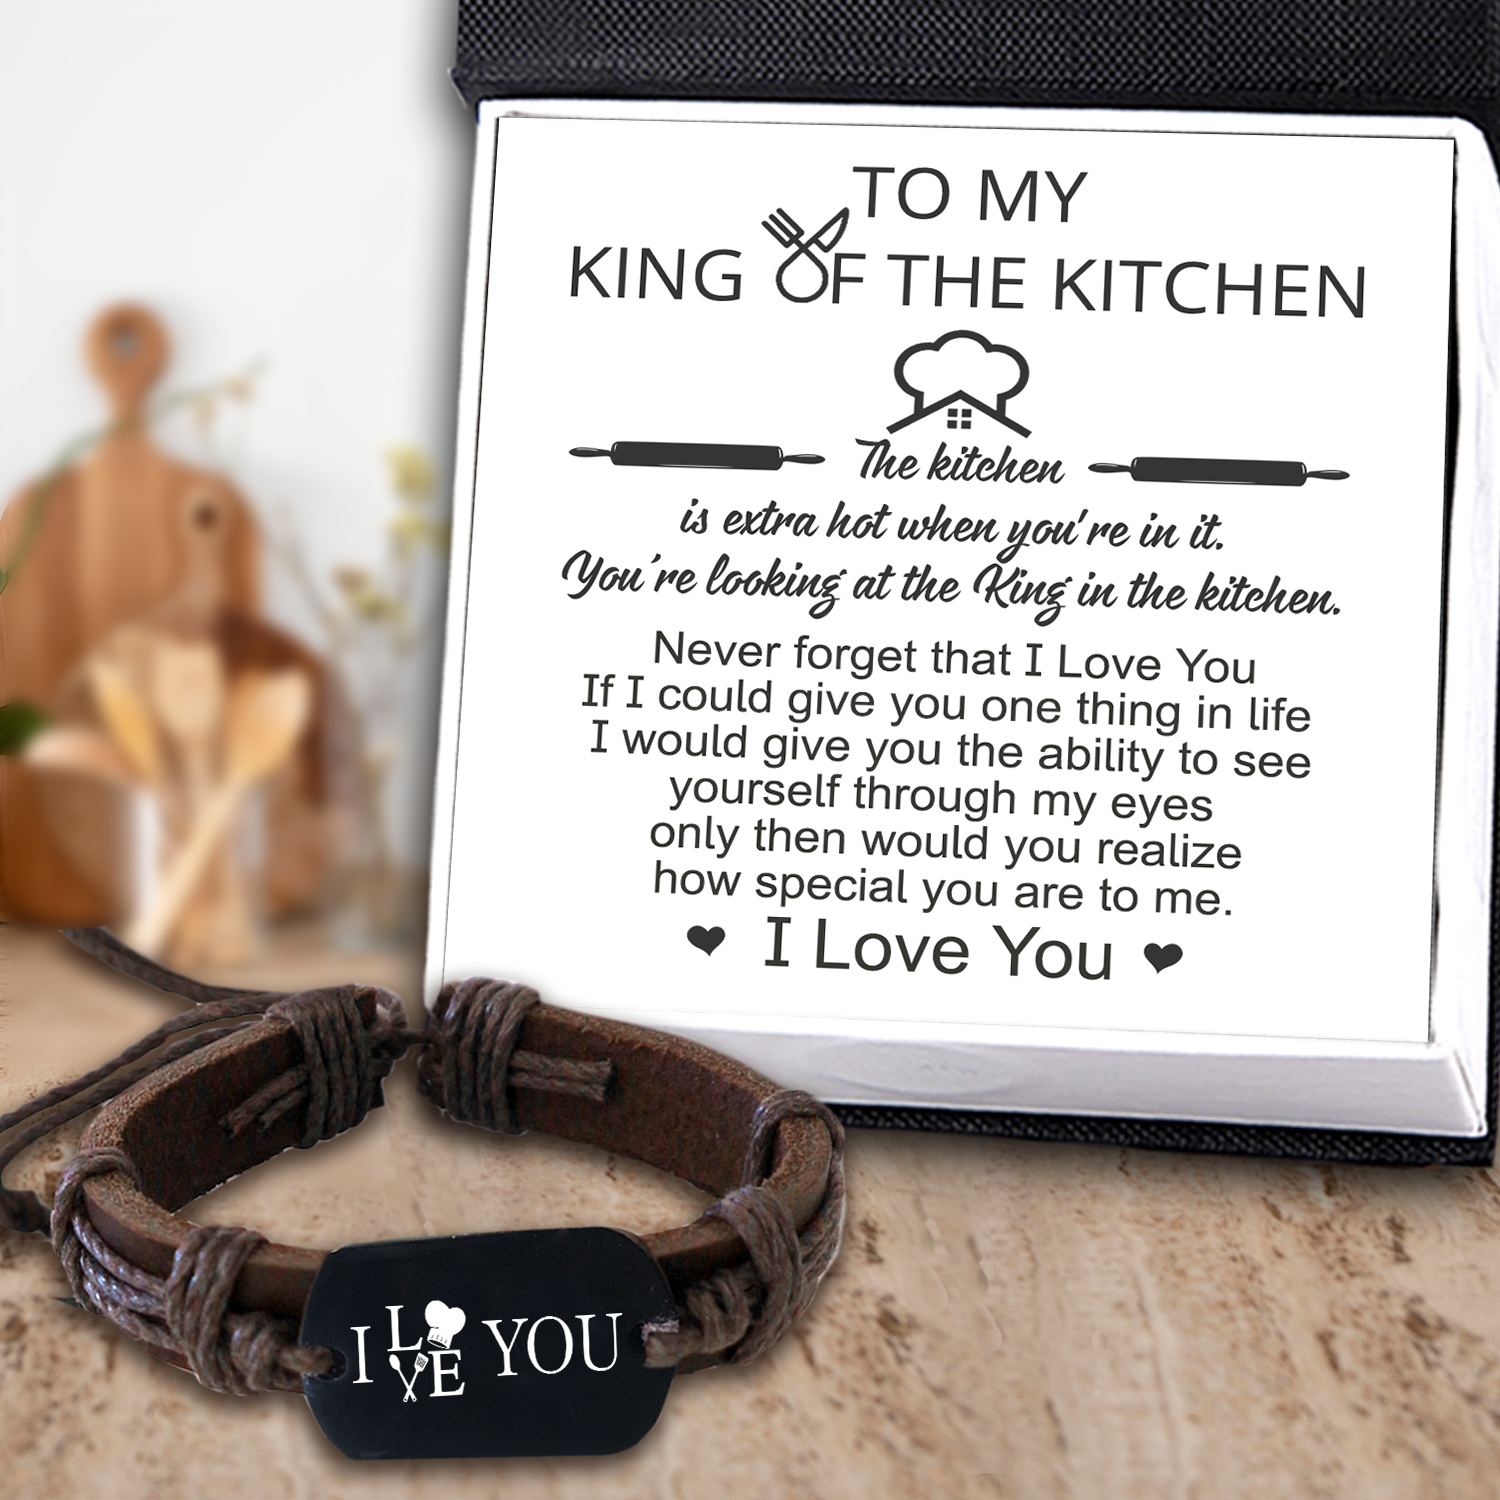 Leather Cord Bracelet - Cooking - To My King Of The Kitchen - I Love You - Ukgbr14007